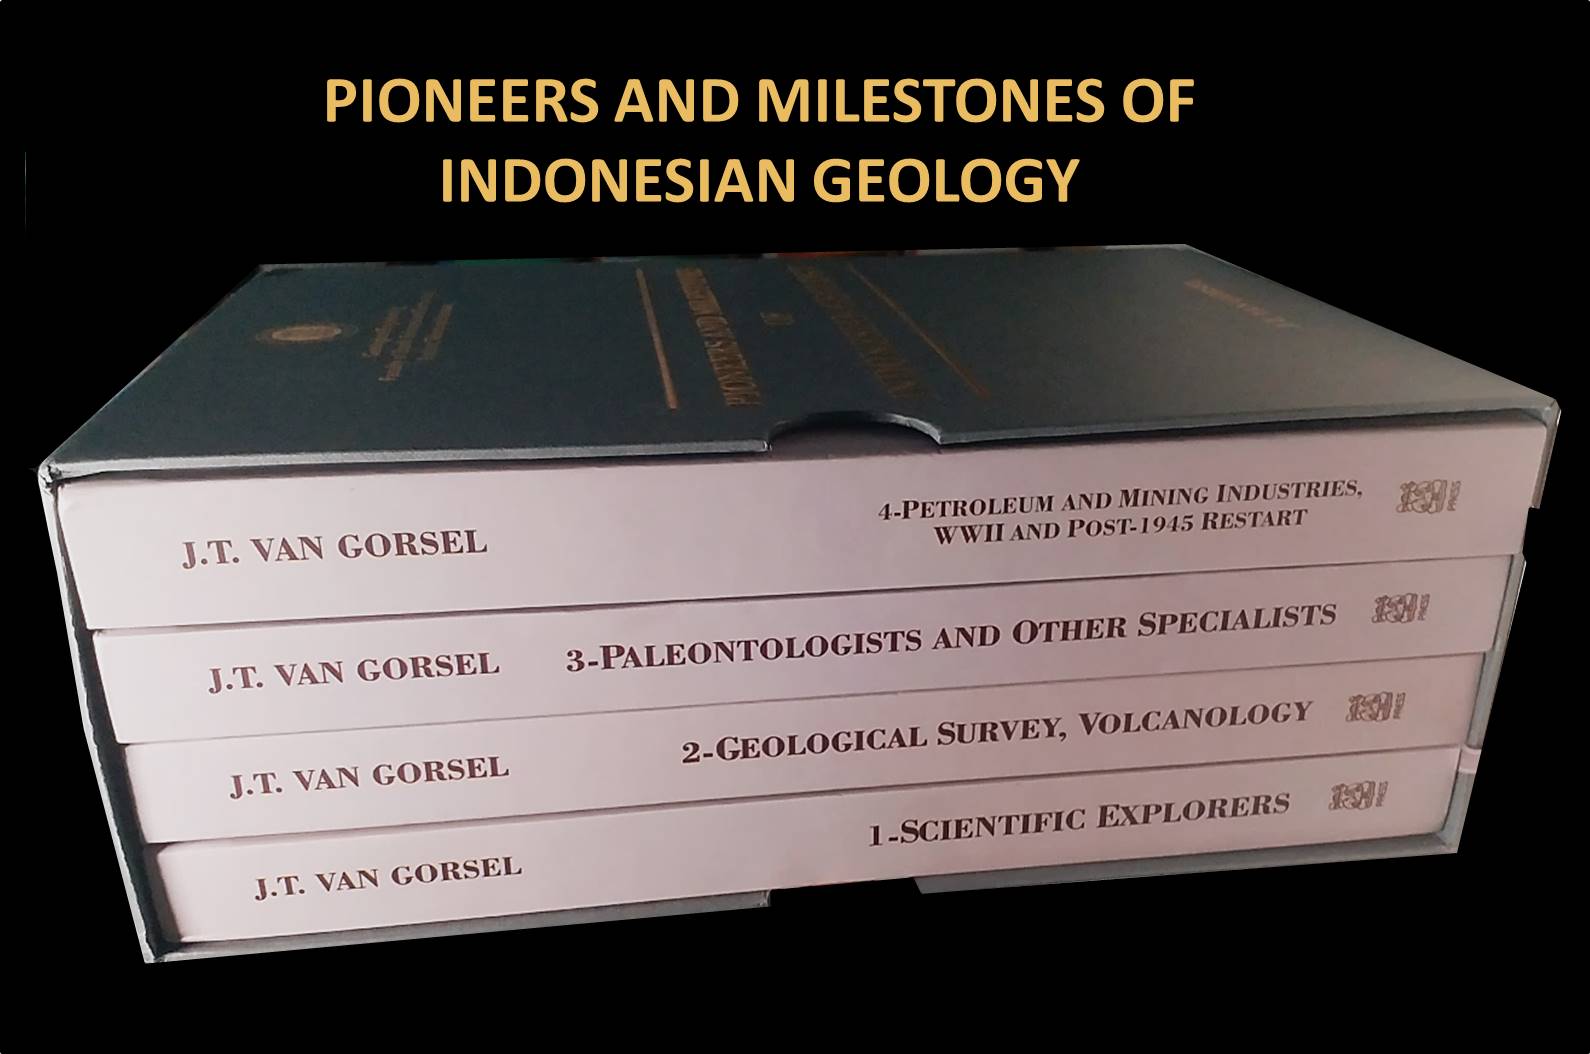 van Gorsel, 2022, View of the box set of the four volumes of Pioneers and milestones of Indonesian Geology